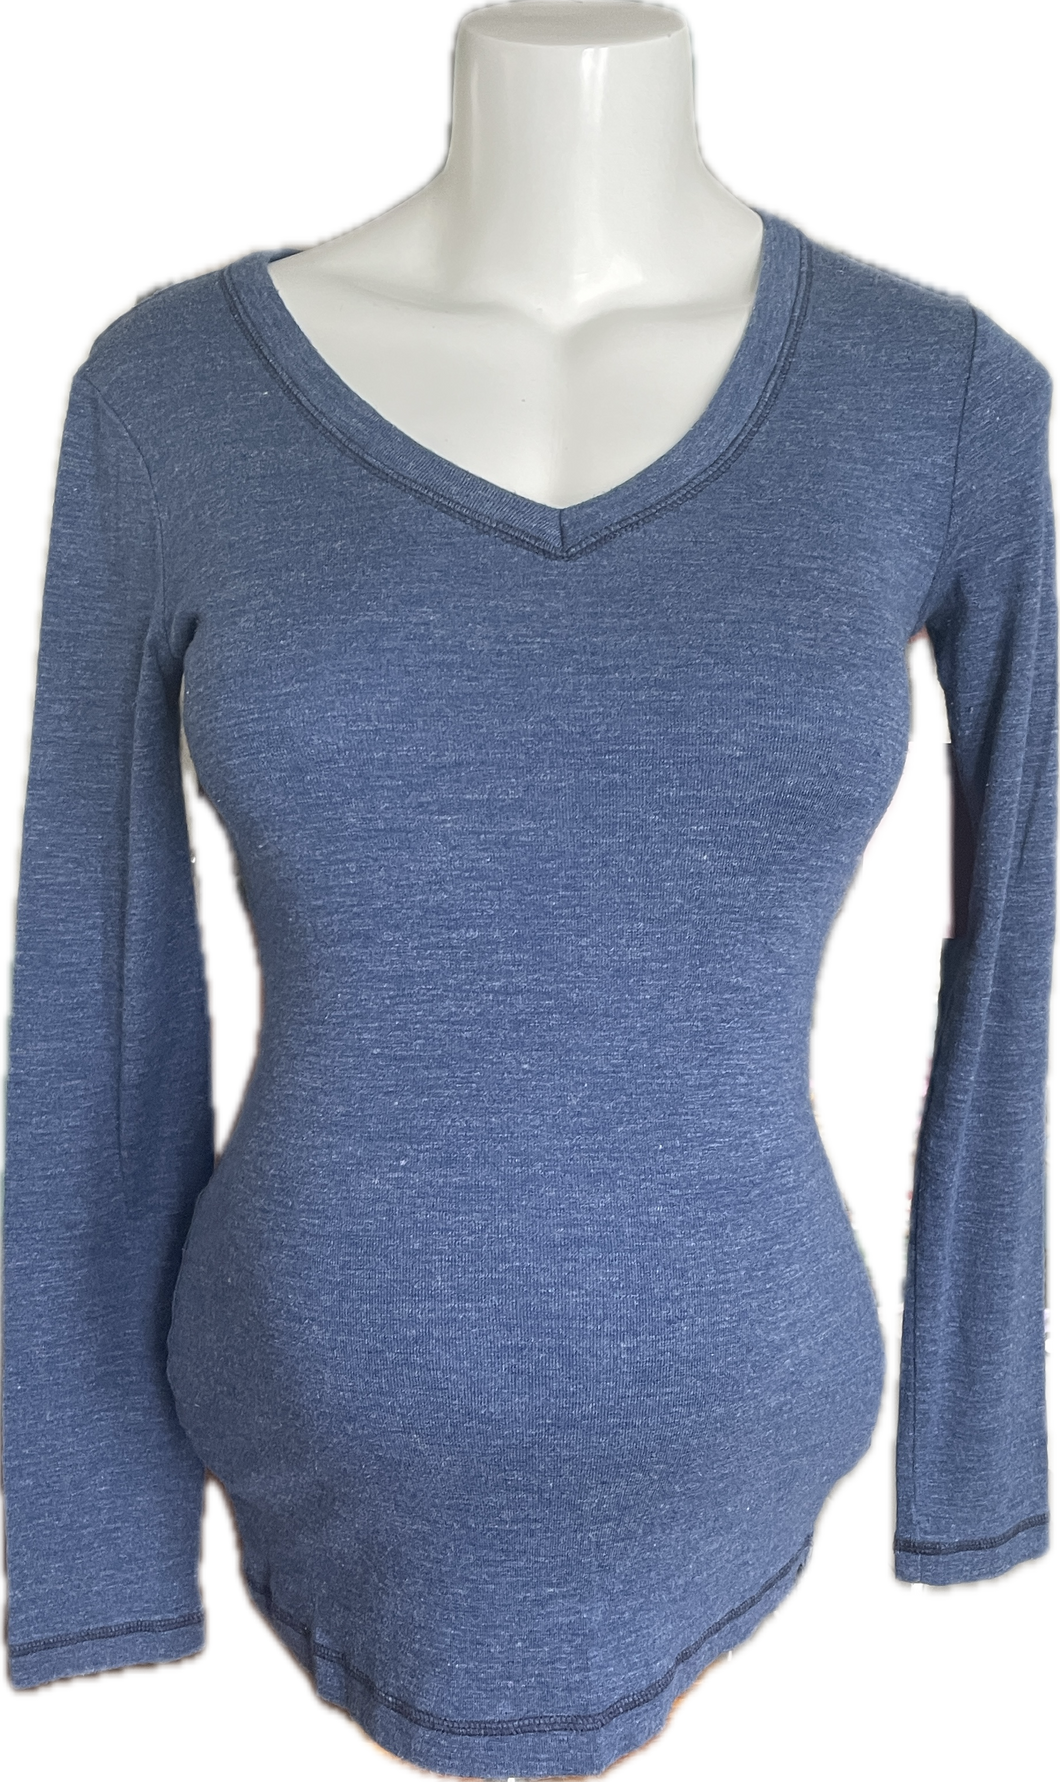 S Gap Maternity The Bowery V-neck in Blue